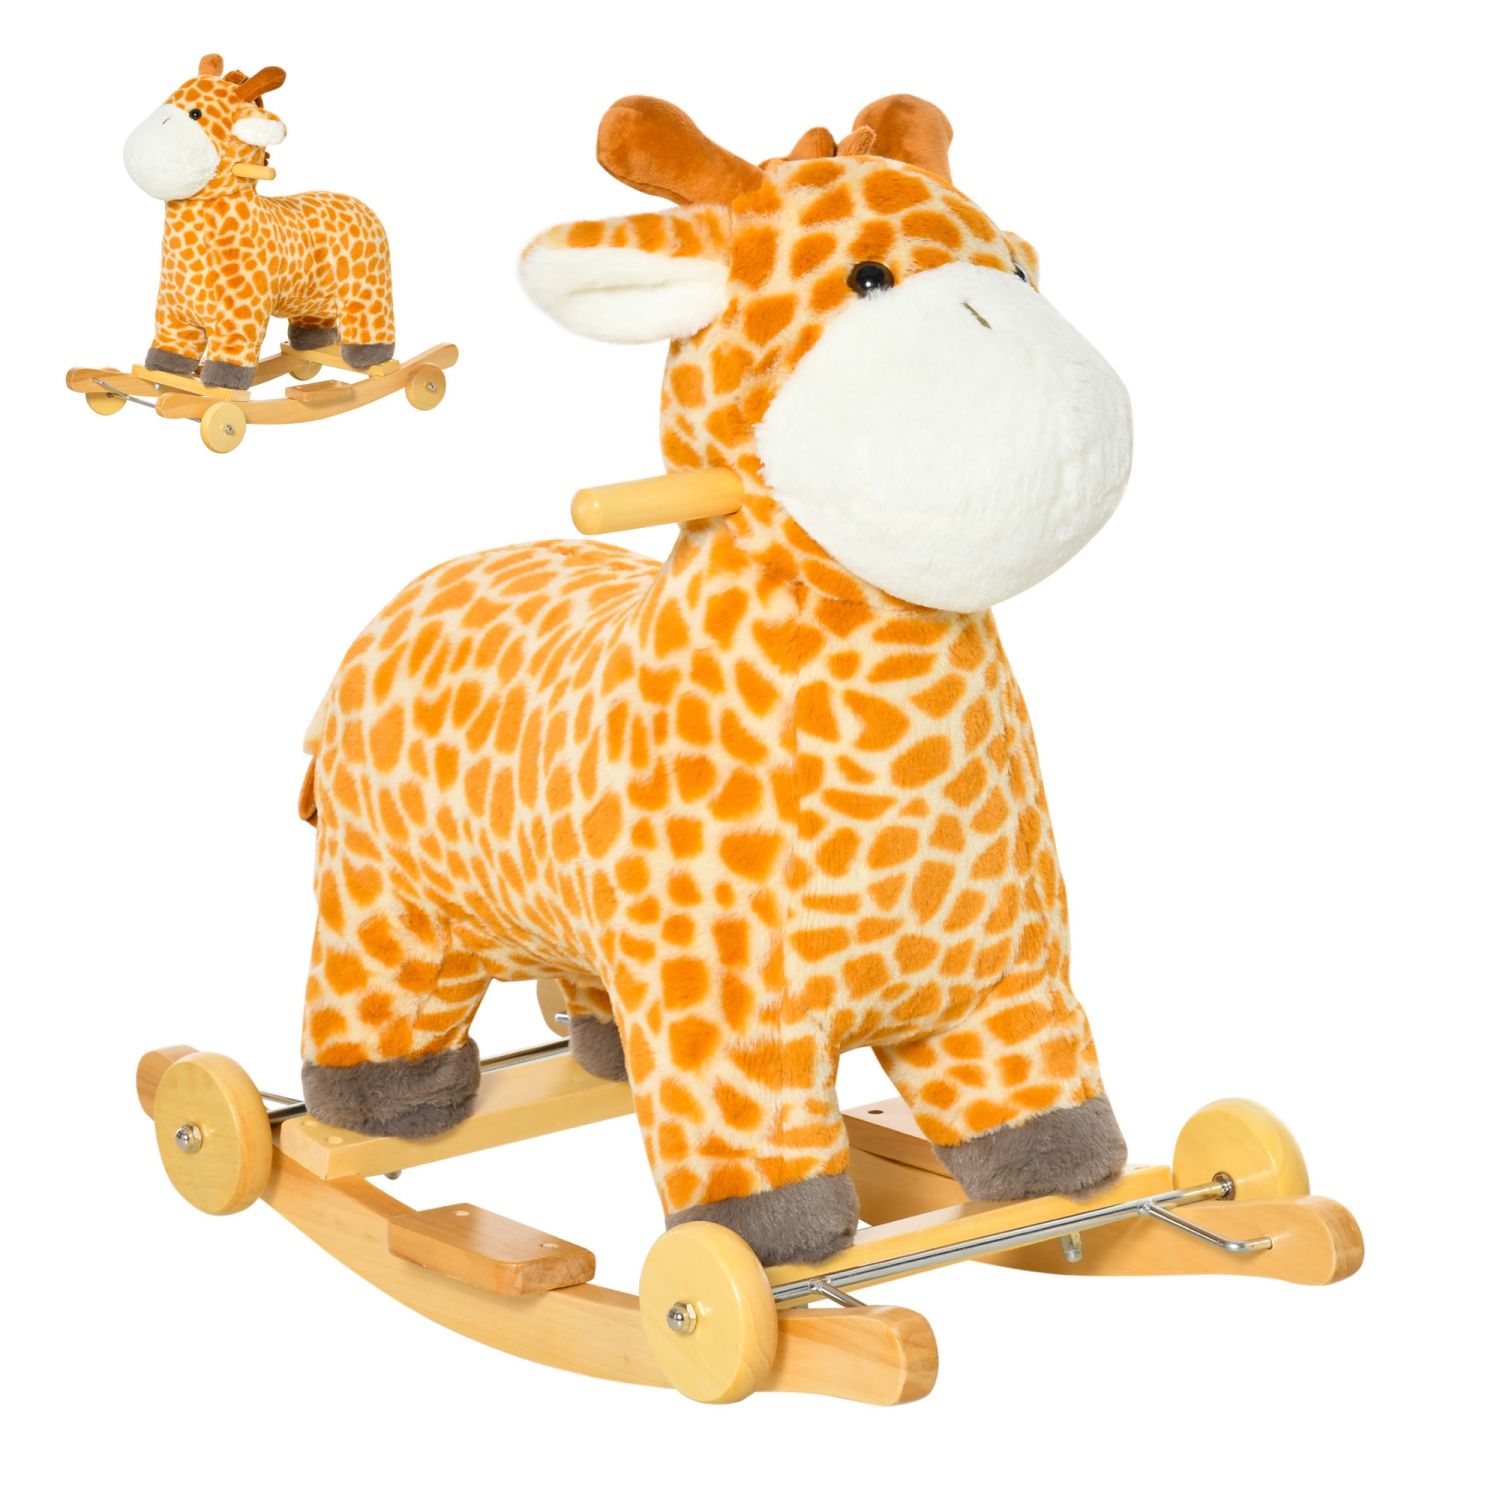 Qaba 2-IN-1 Rocking Horse Kids Plush Ride-On Gliding Giraffe-shaped Plush Toy Rocker with Realistic Sounds for Child 36-72 Months Yellow